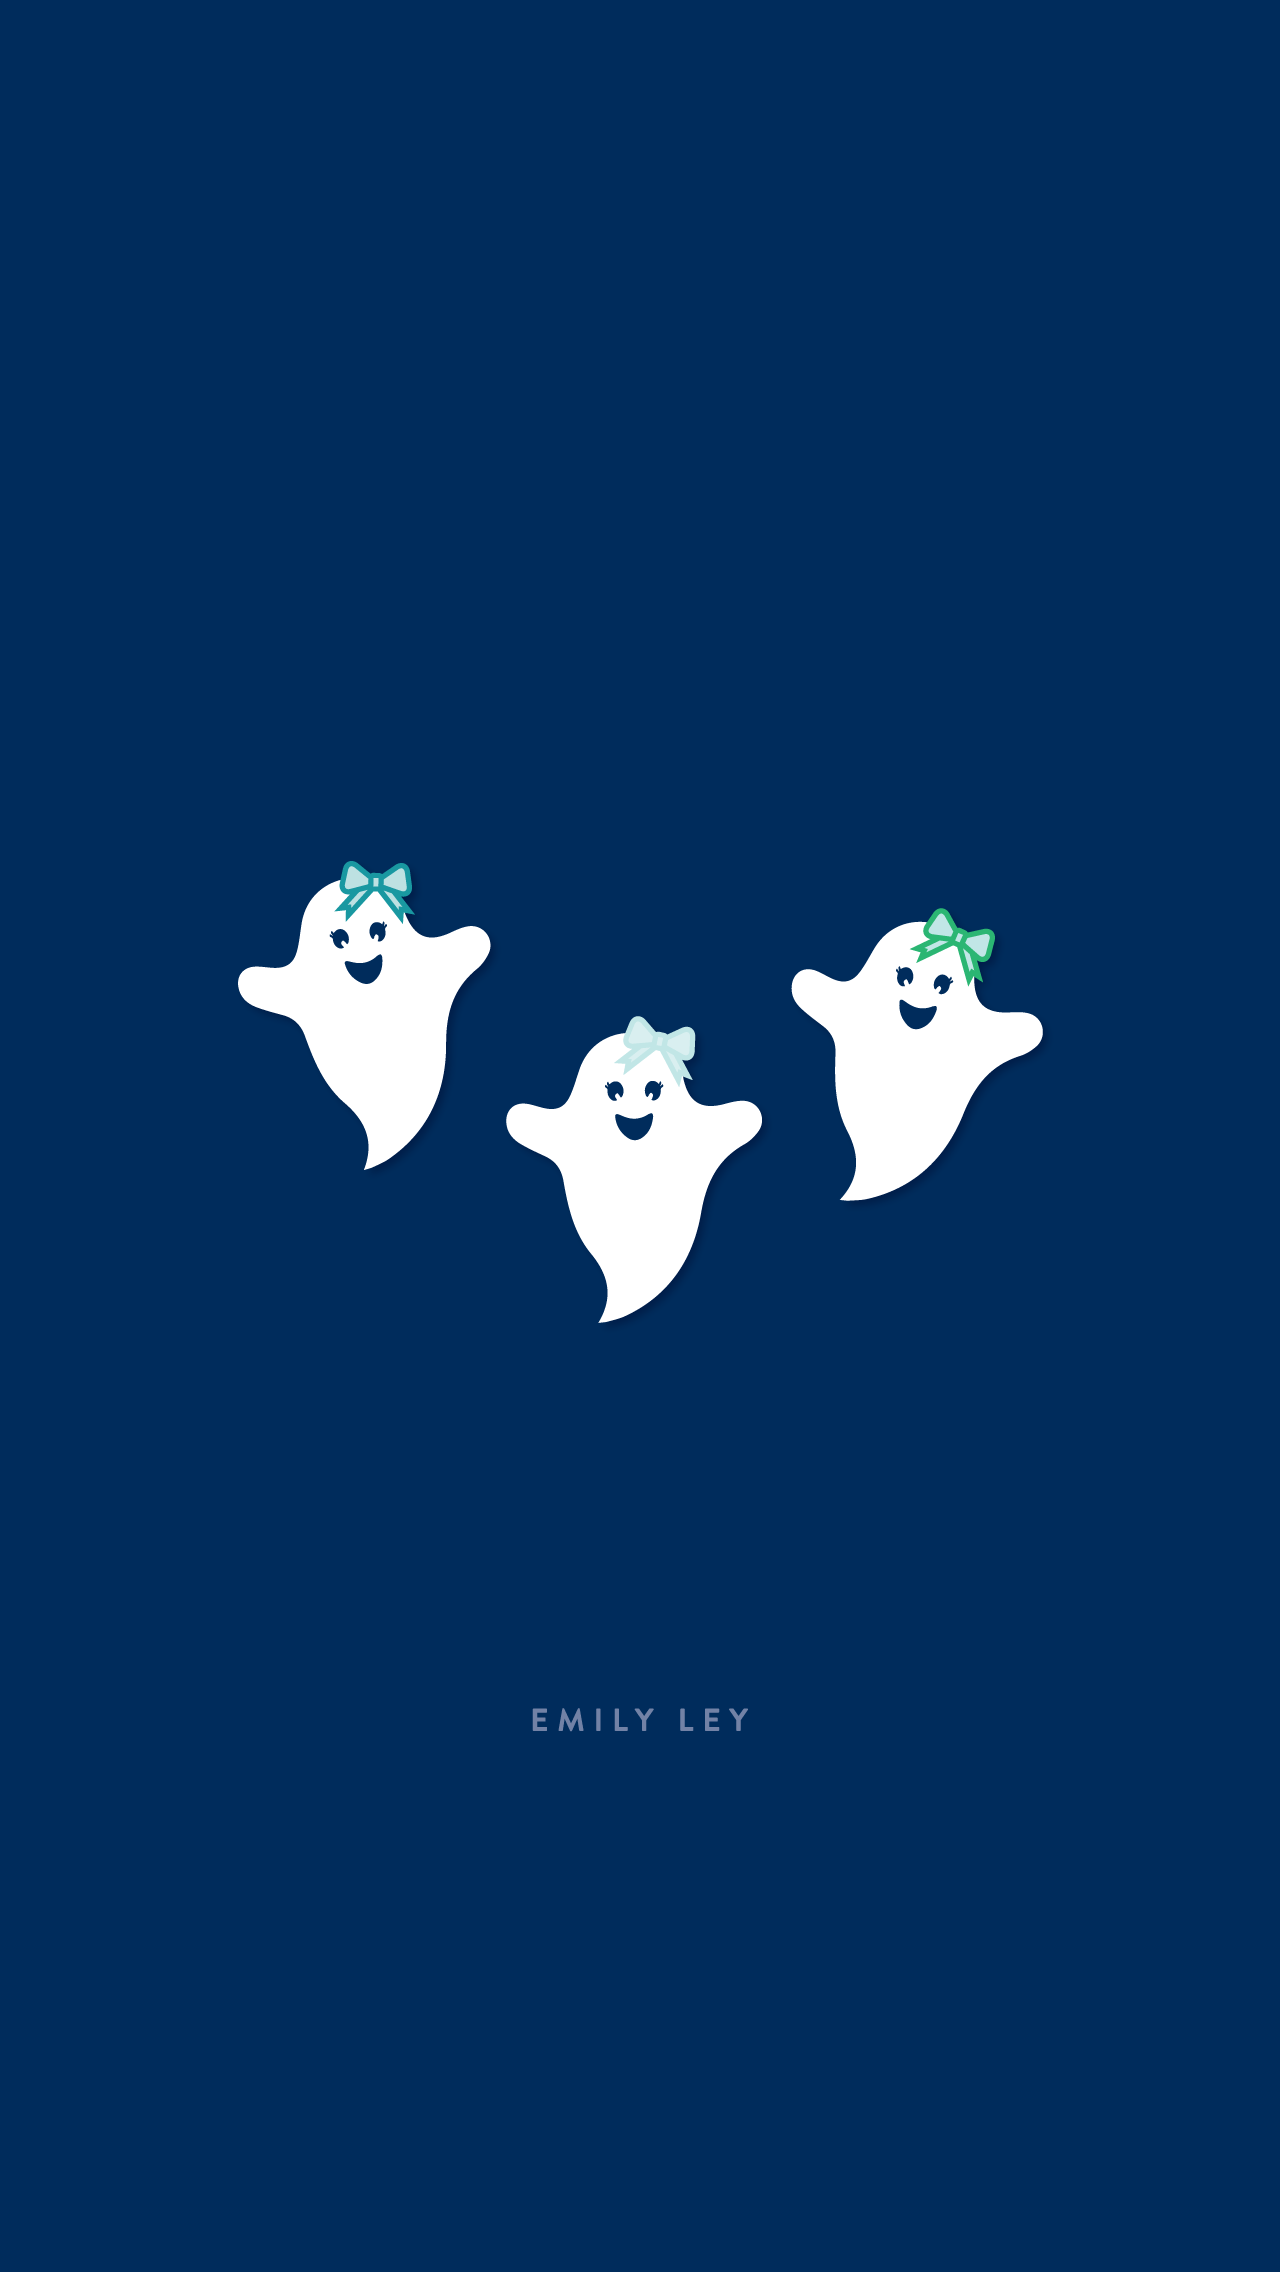 Free iPhone Wallpaper for Halloween. Ghosts Wallpaper. Navy. Happy Ghosts. iPhone wallpaper fall, Disney phone wallpaper, Free iphone wallpaper